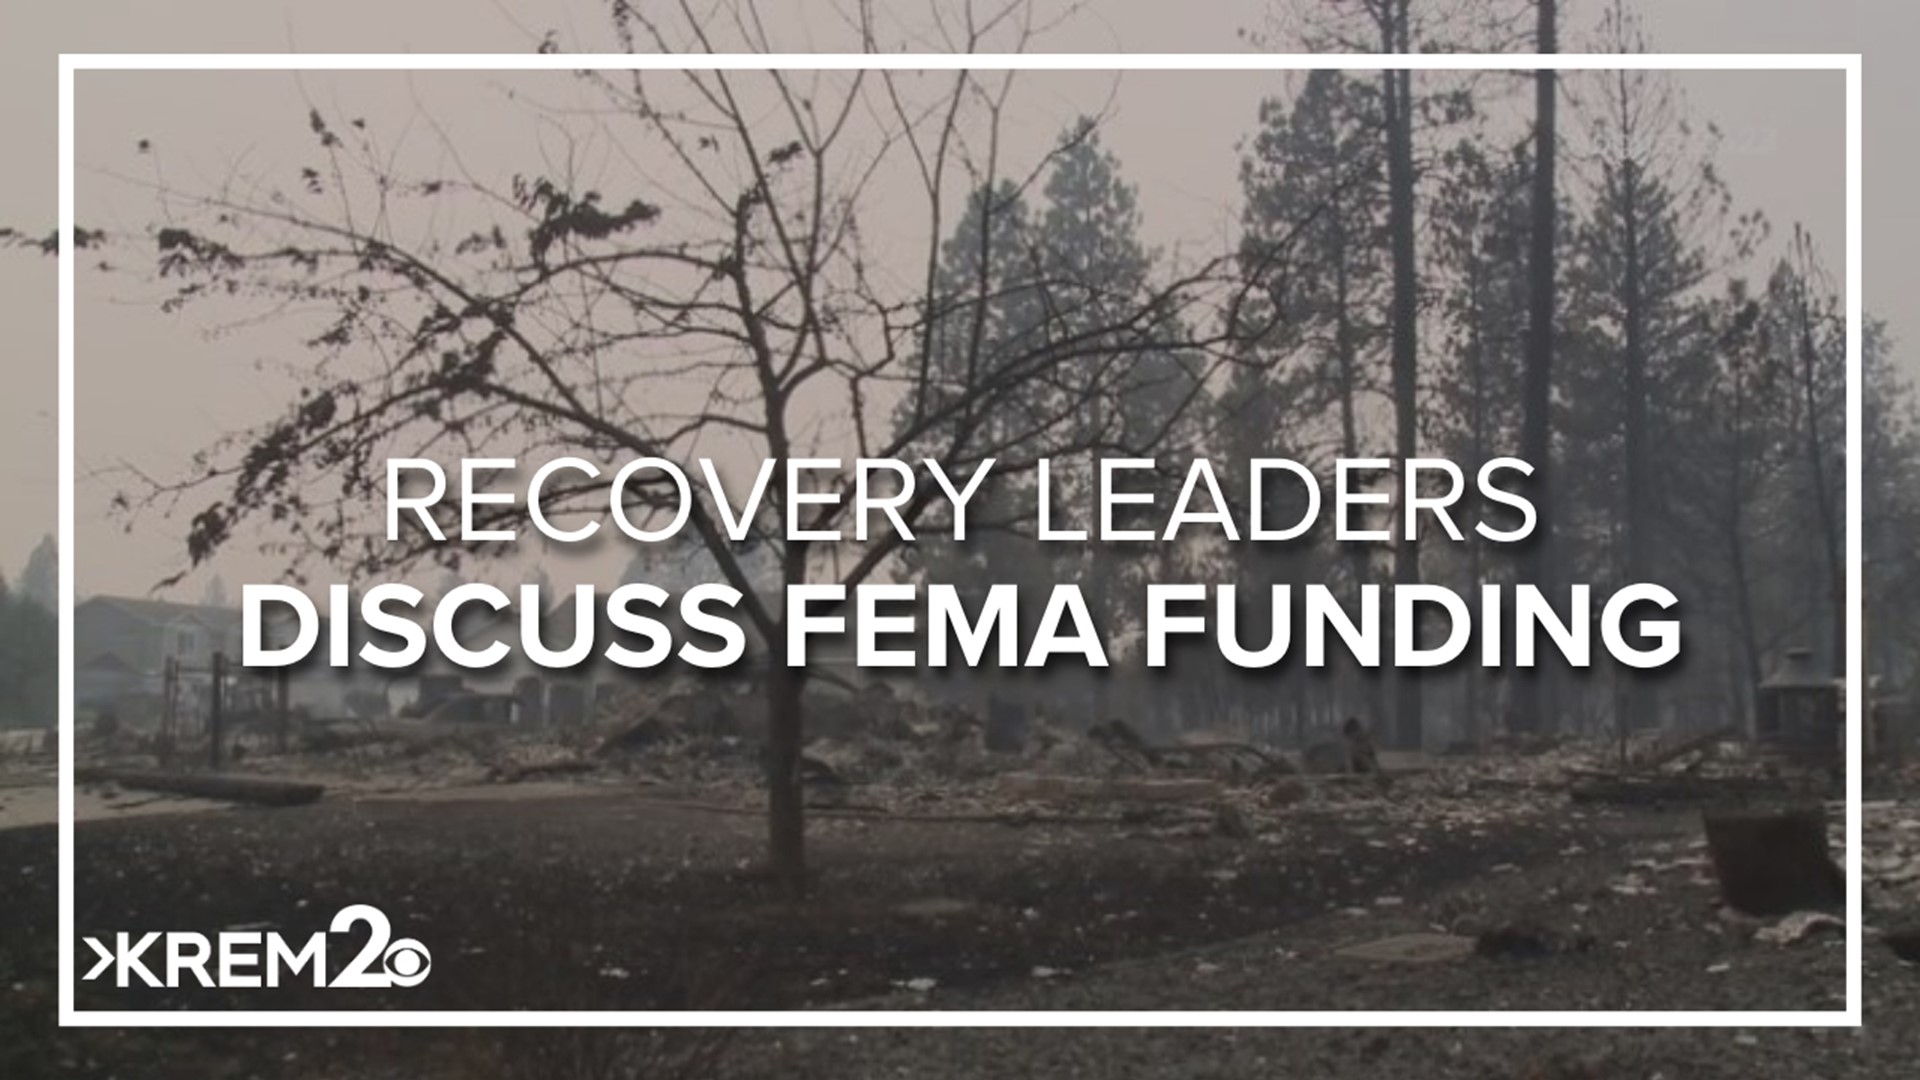 More than 50 people have already applied for FEMA funding. President Joe Biden approved the federal funds on Tuesday for victims of the Spokane wildfires.